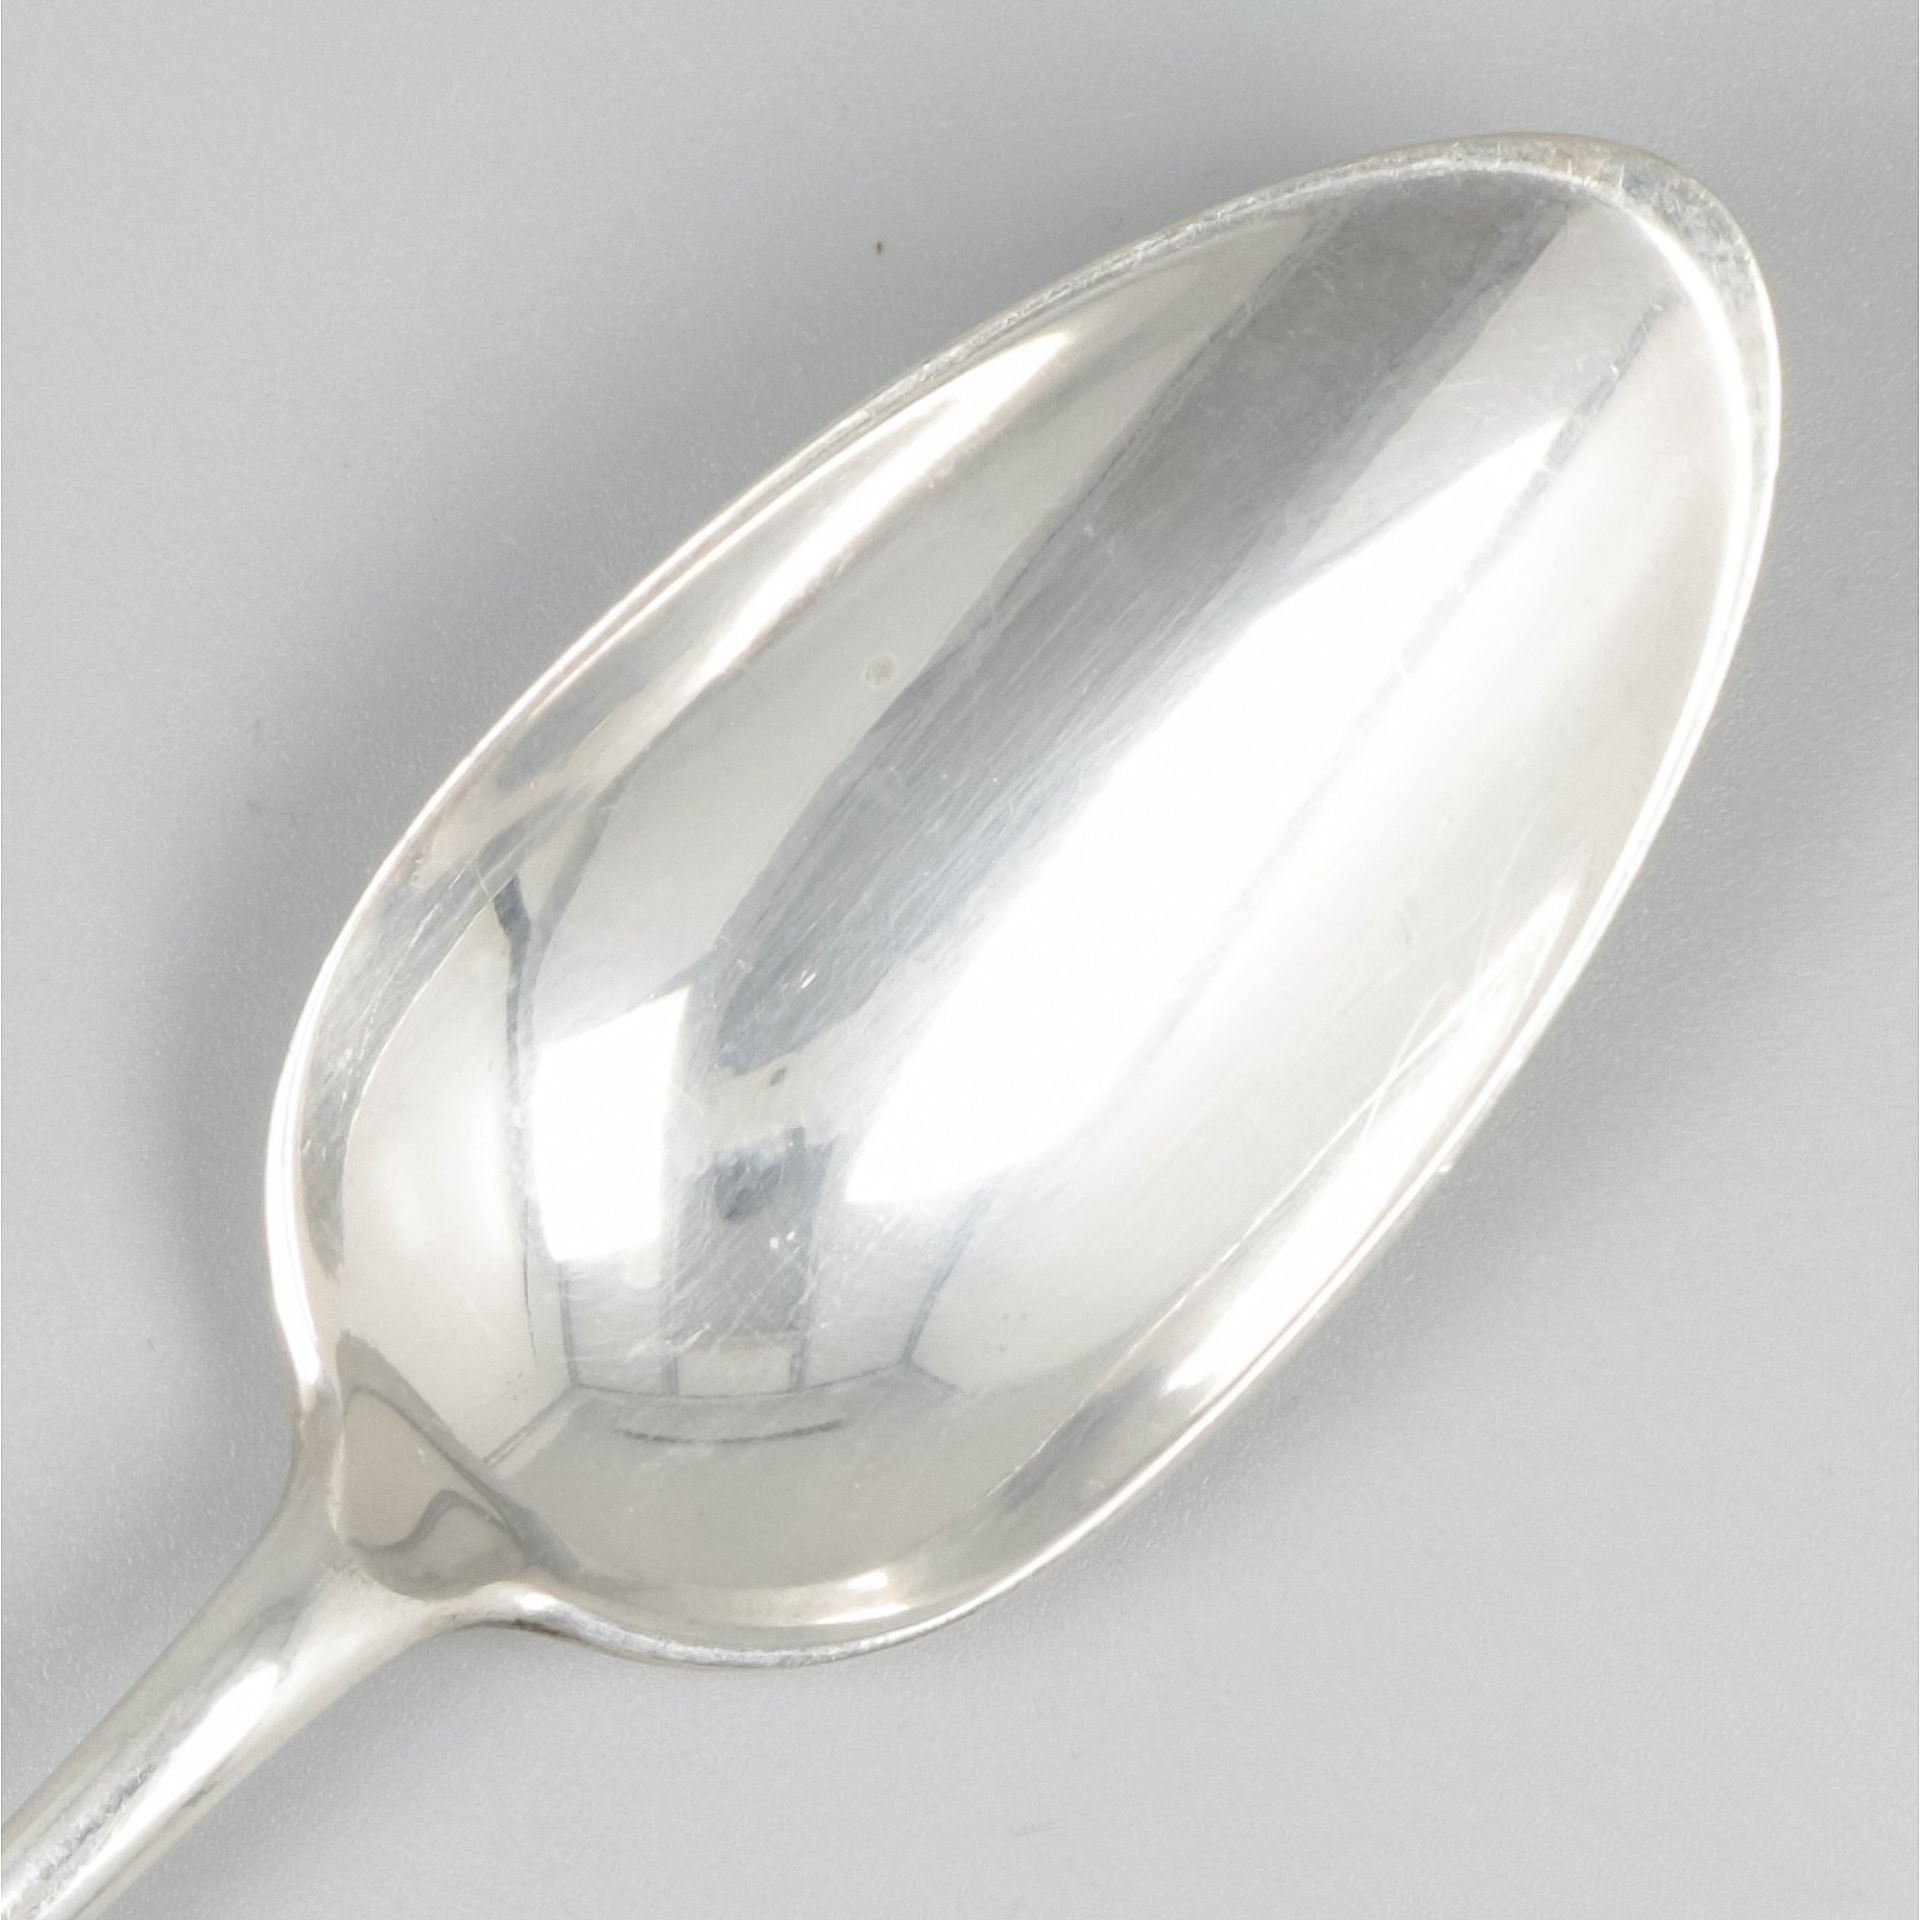 6-piece set of silver spoons. - Image 4 of 6